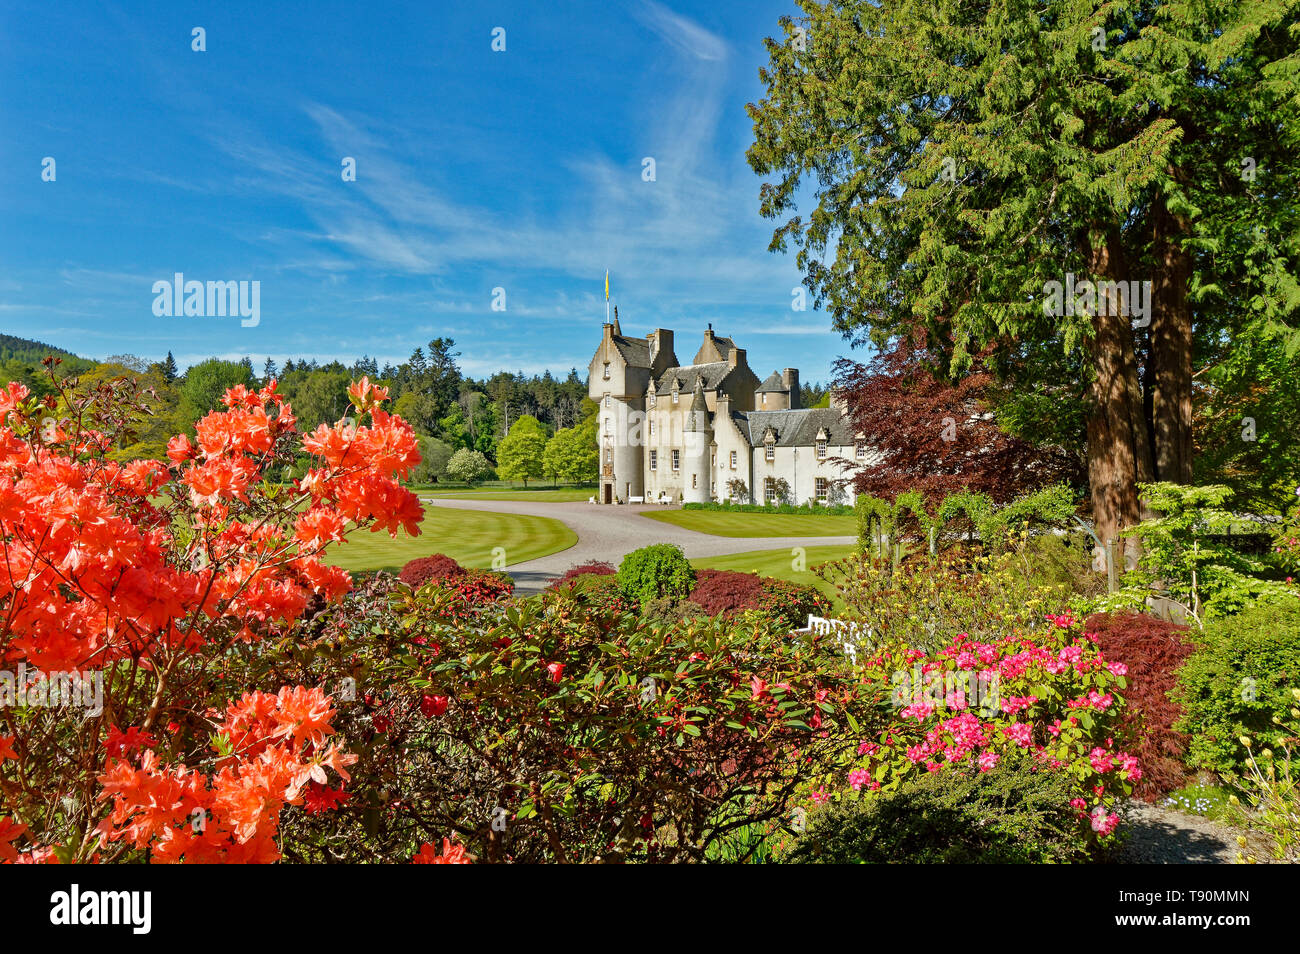 BALLINDALLOCH CASTLE BANFFSHIRE SCOTLAND THE  GARDENS IN SPRINGTIME WITH COLOURFUL AZALEAS AND RHODODENDRONS Stock Photo